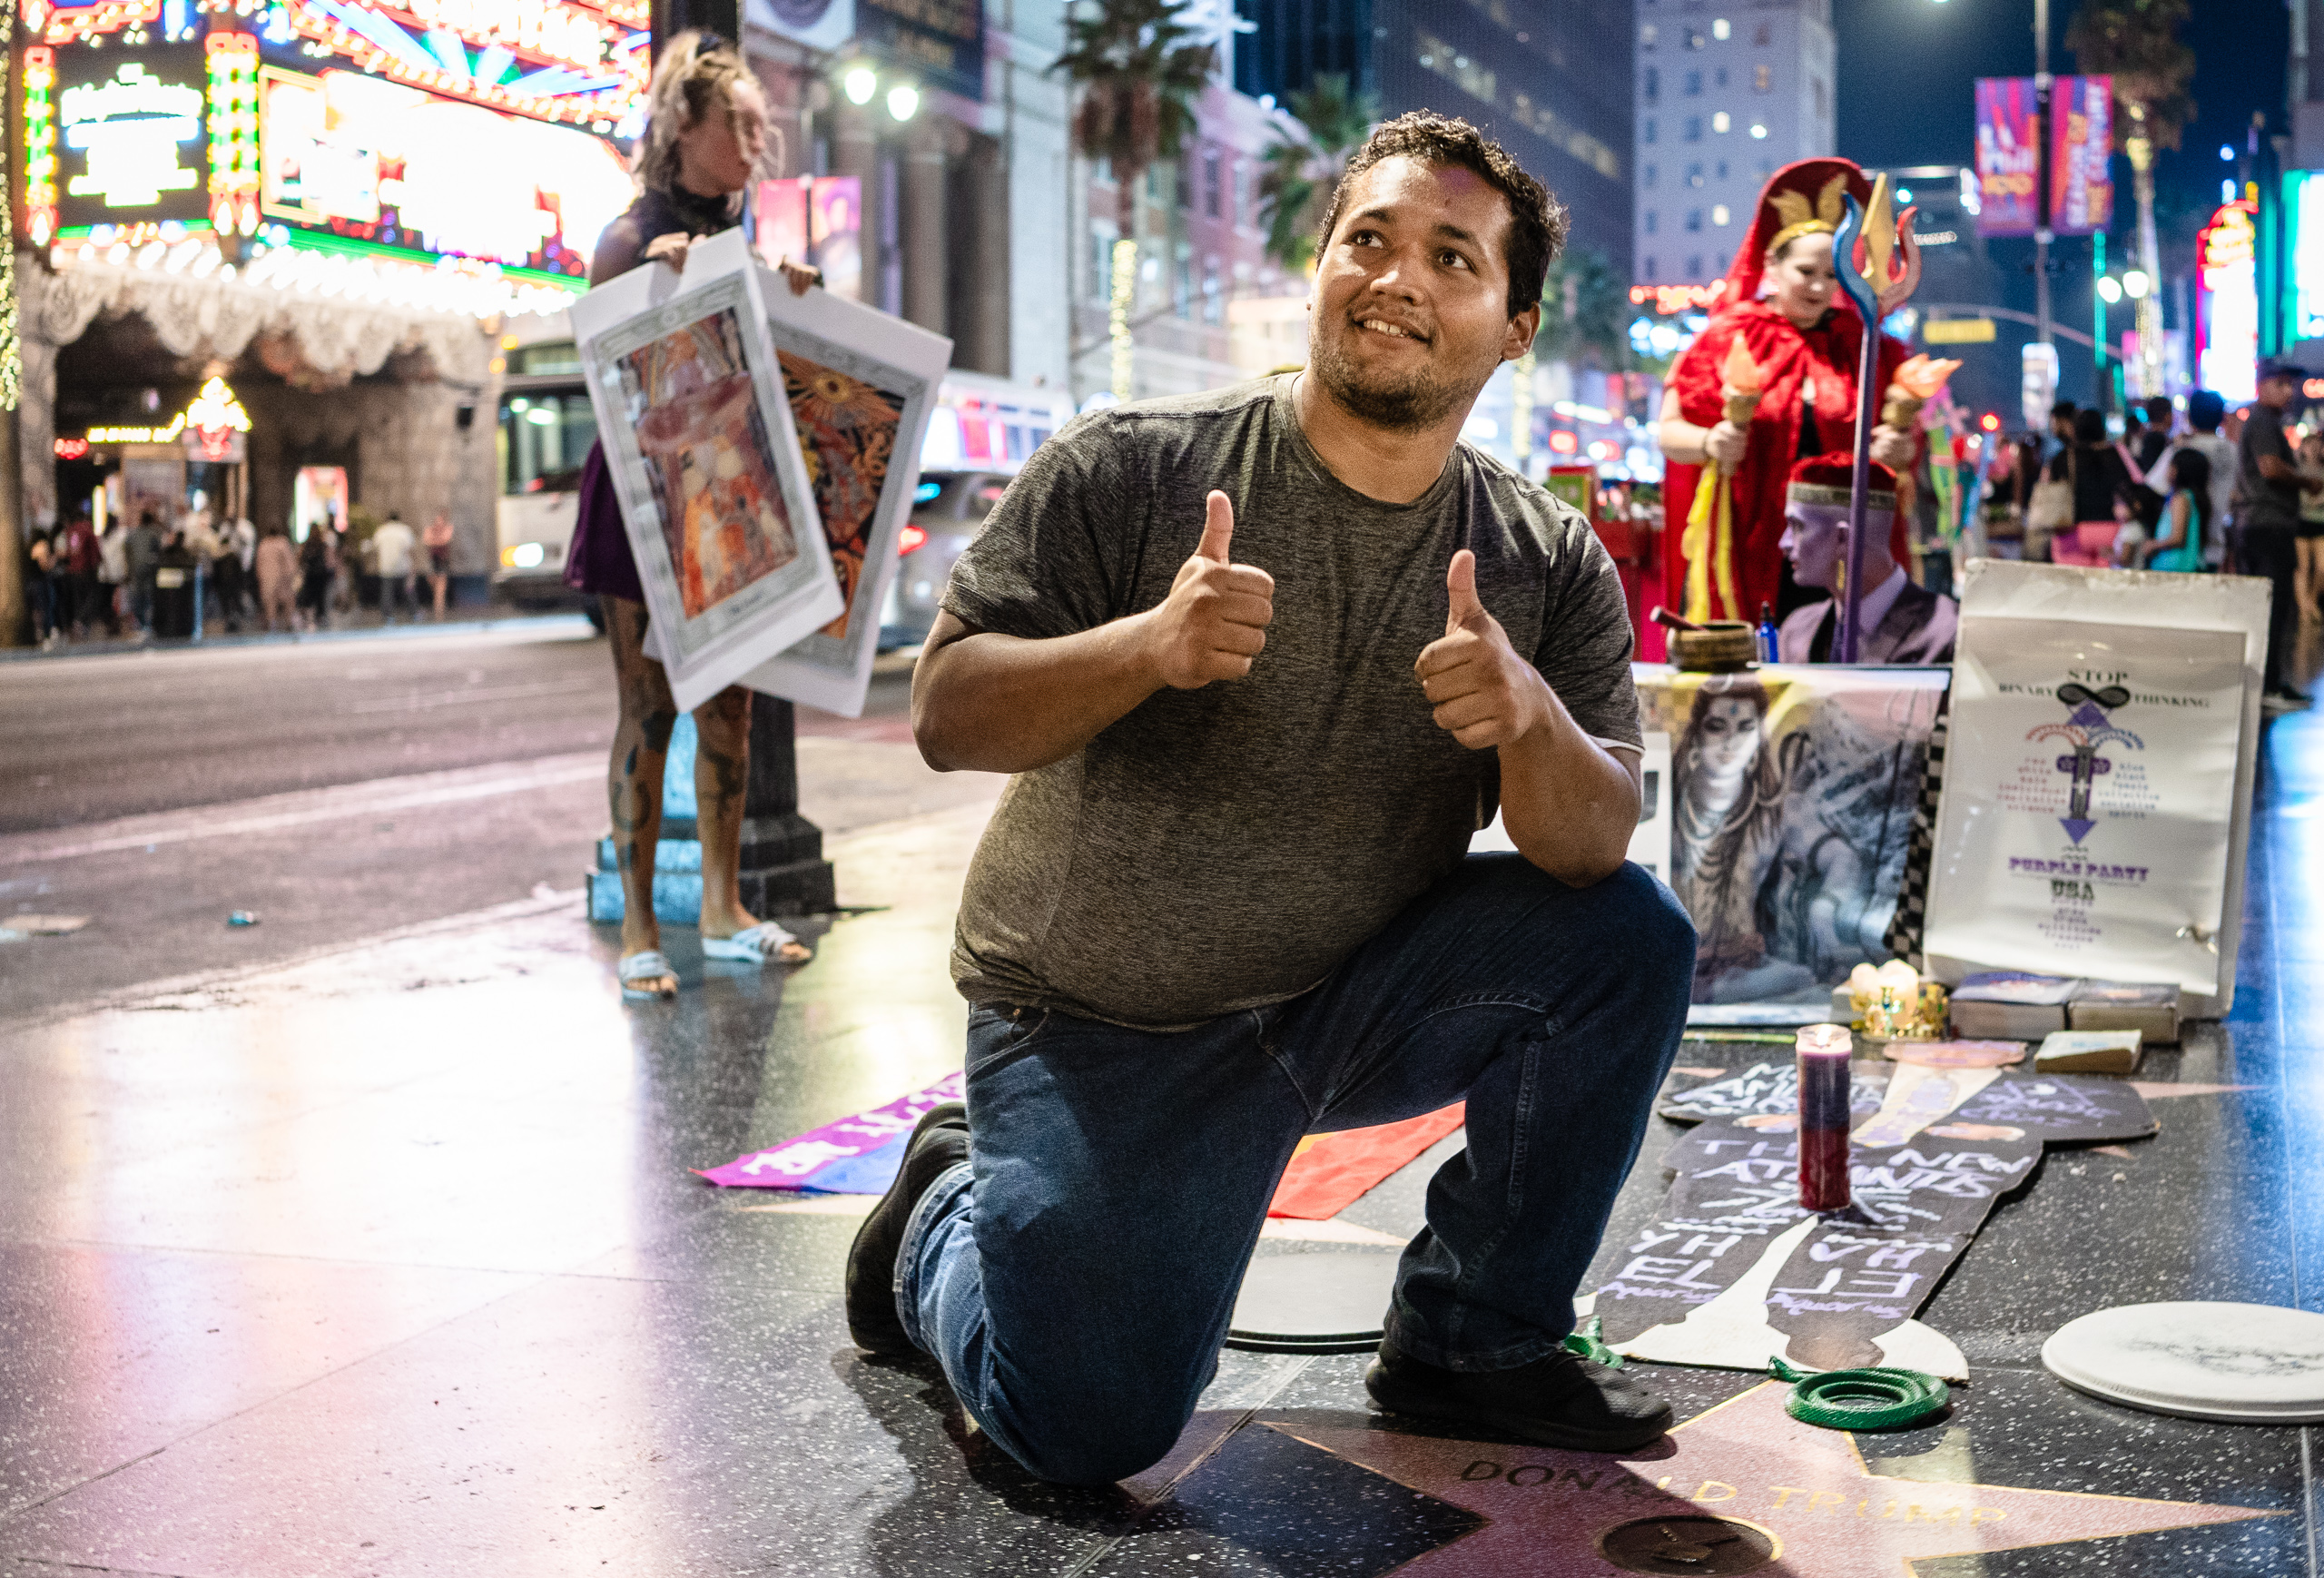 Activities at Donald Trump's Star on Hollywood Boulevard on Saturday 8 September 2018, featuring a Purple Party performance, "Shiva NonDuality Mantras @ Hollywood Trump Star"